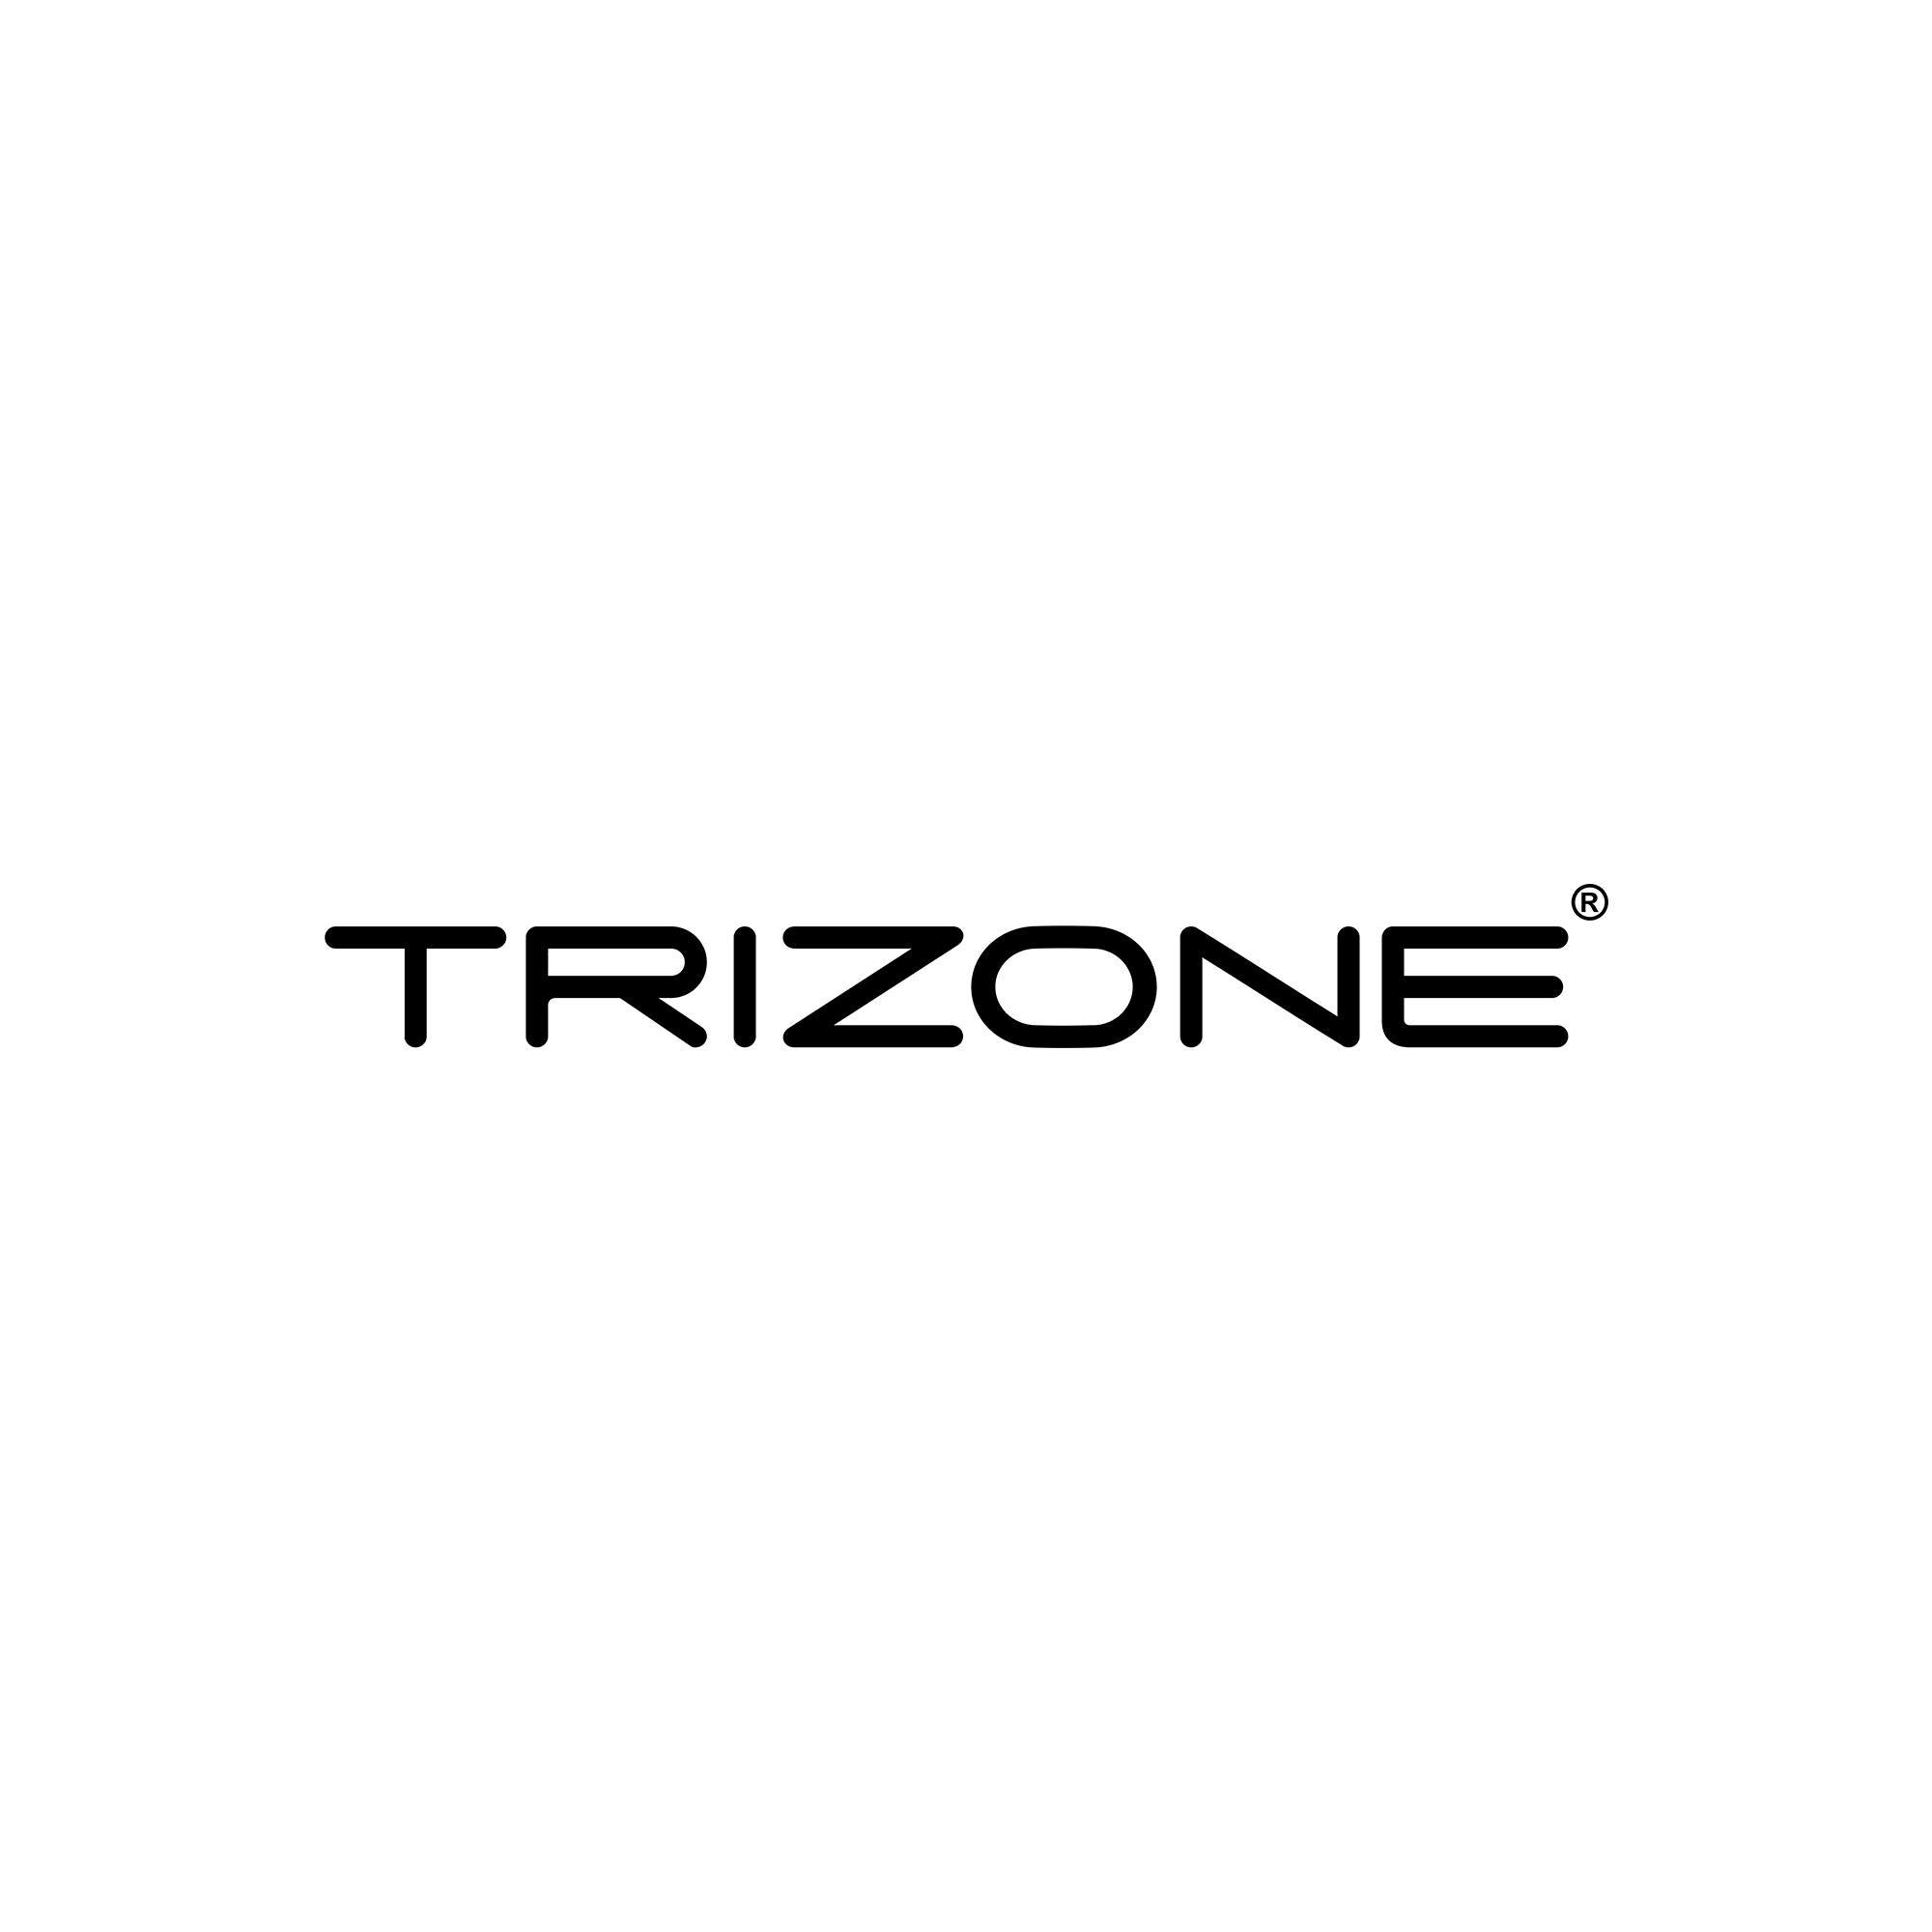 Trizone Communications Pvt. Ltd.|Accounting Services|Professional Services